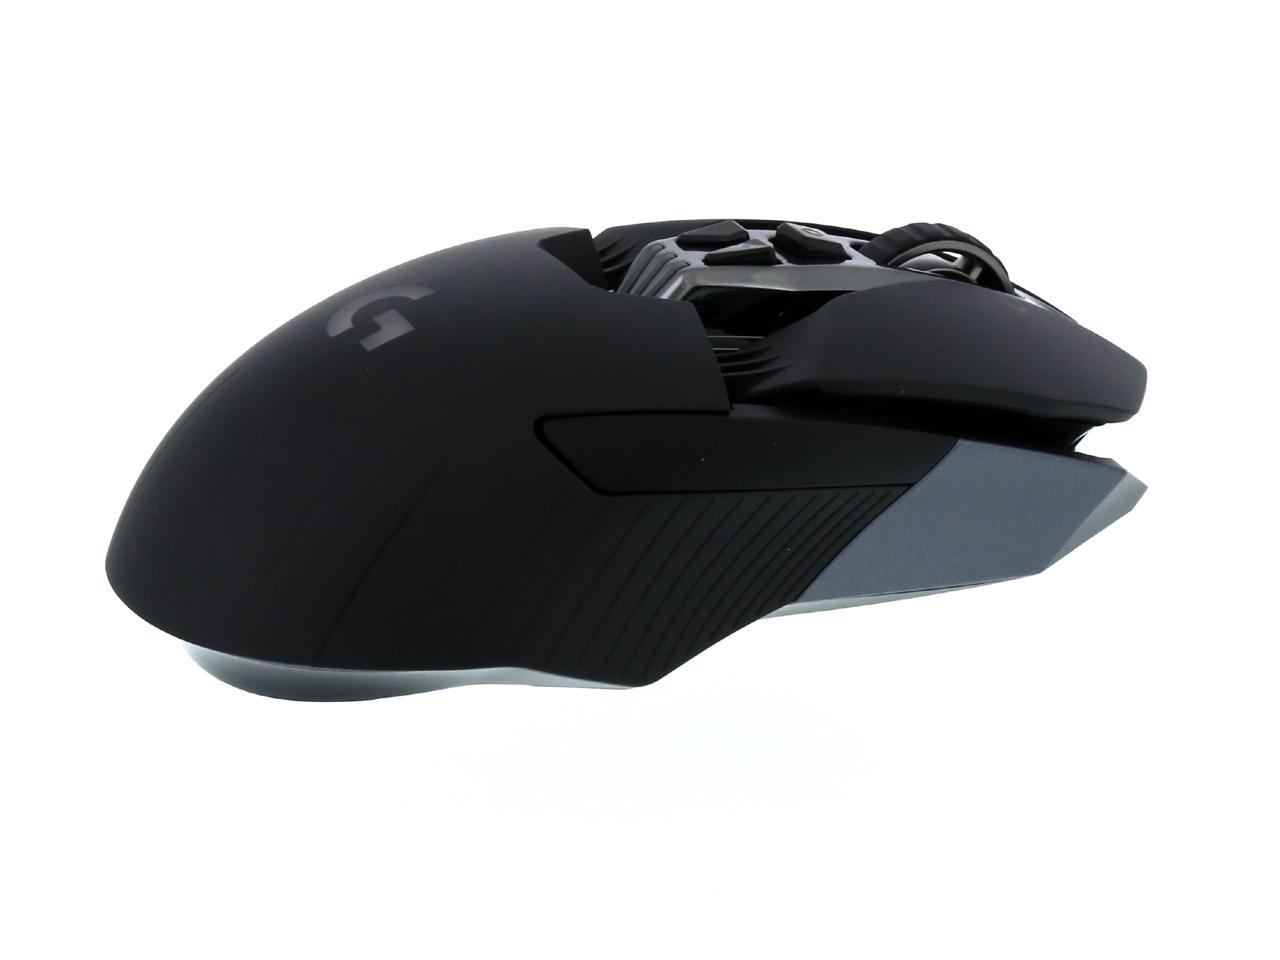 Logitech G900 Chaos Spectrum Professional Grade Wired/Wireless Gaming Mouse Newegg.com